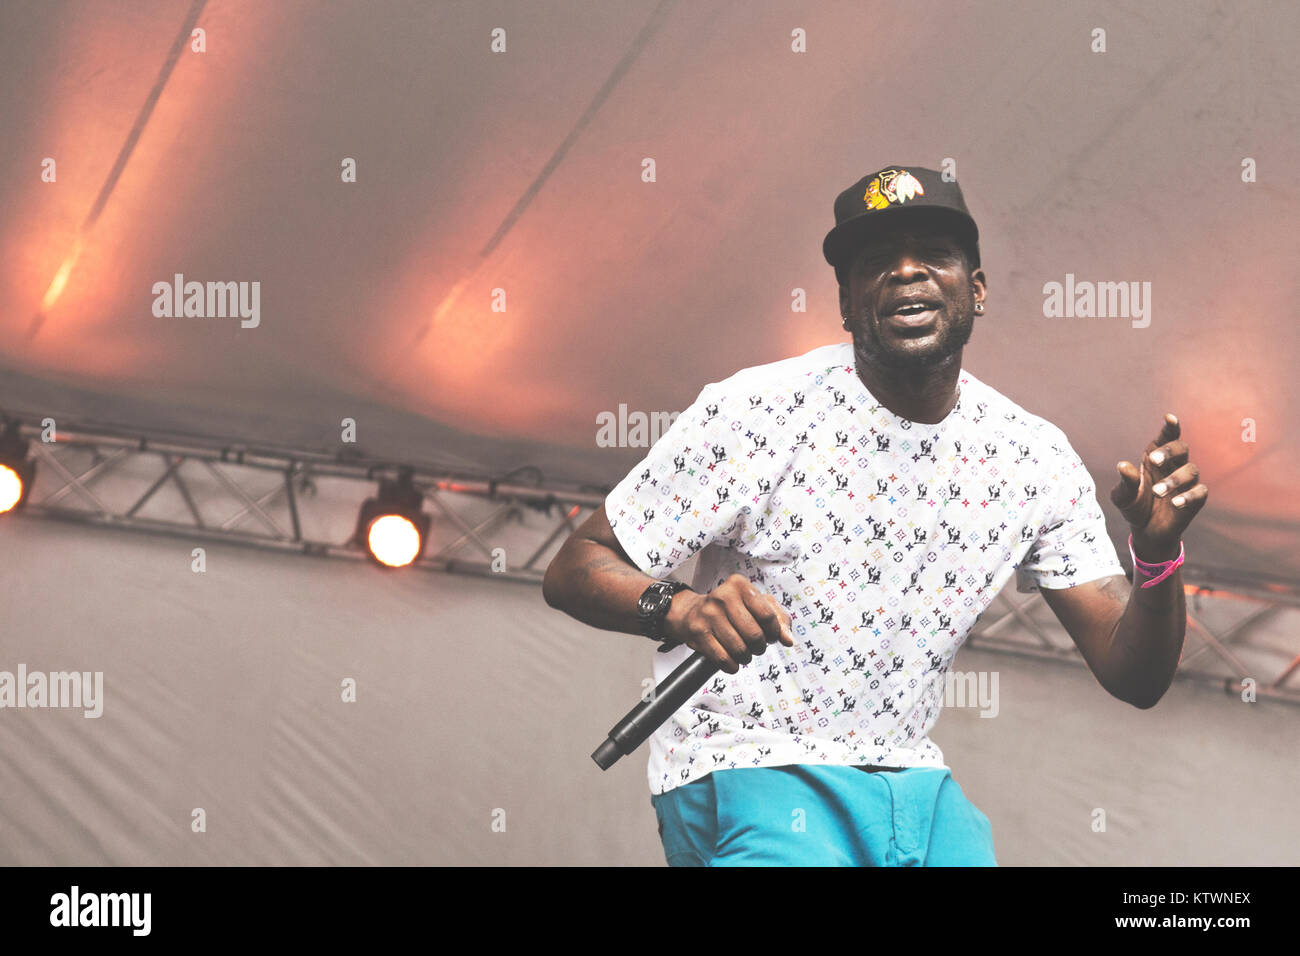 The American rap and hip hop group The Pharcyde performs a live concert at Vanguard Festival 2014 in Copenhagen. Here the rapper Imani is pictured live on stage. Denmark, 02/08 2014. Stock Photo